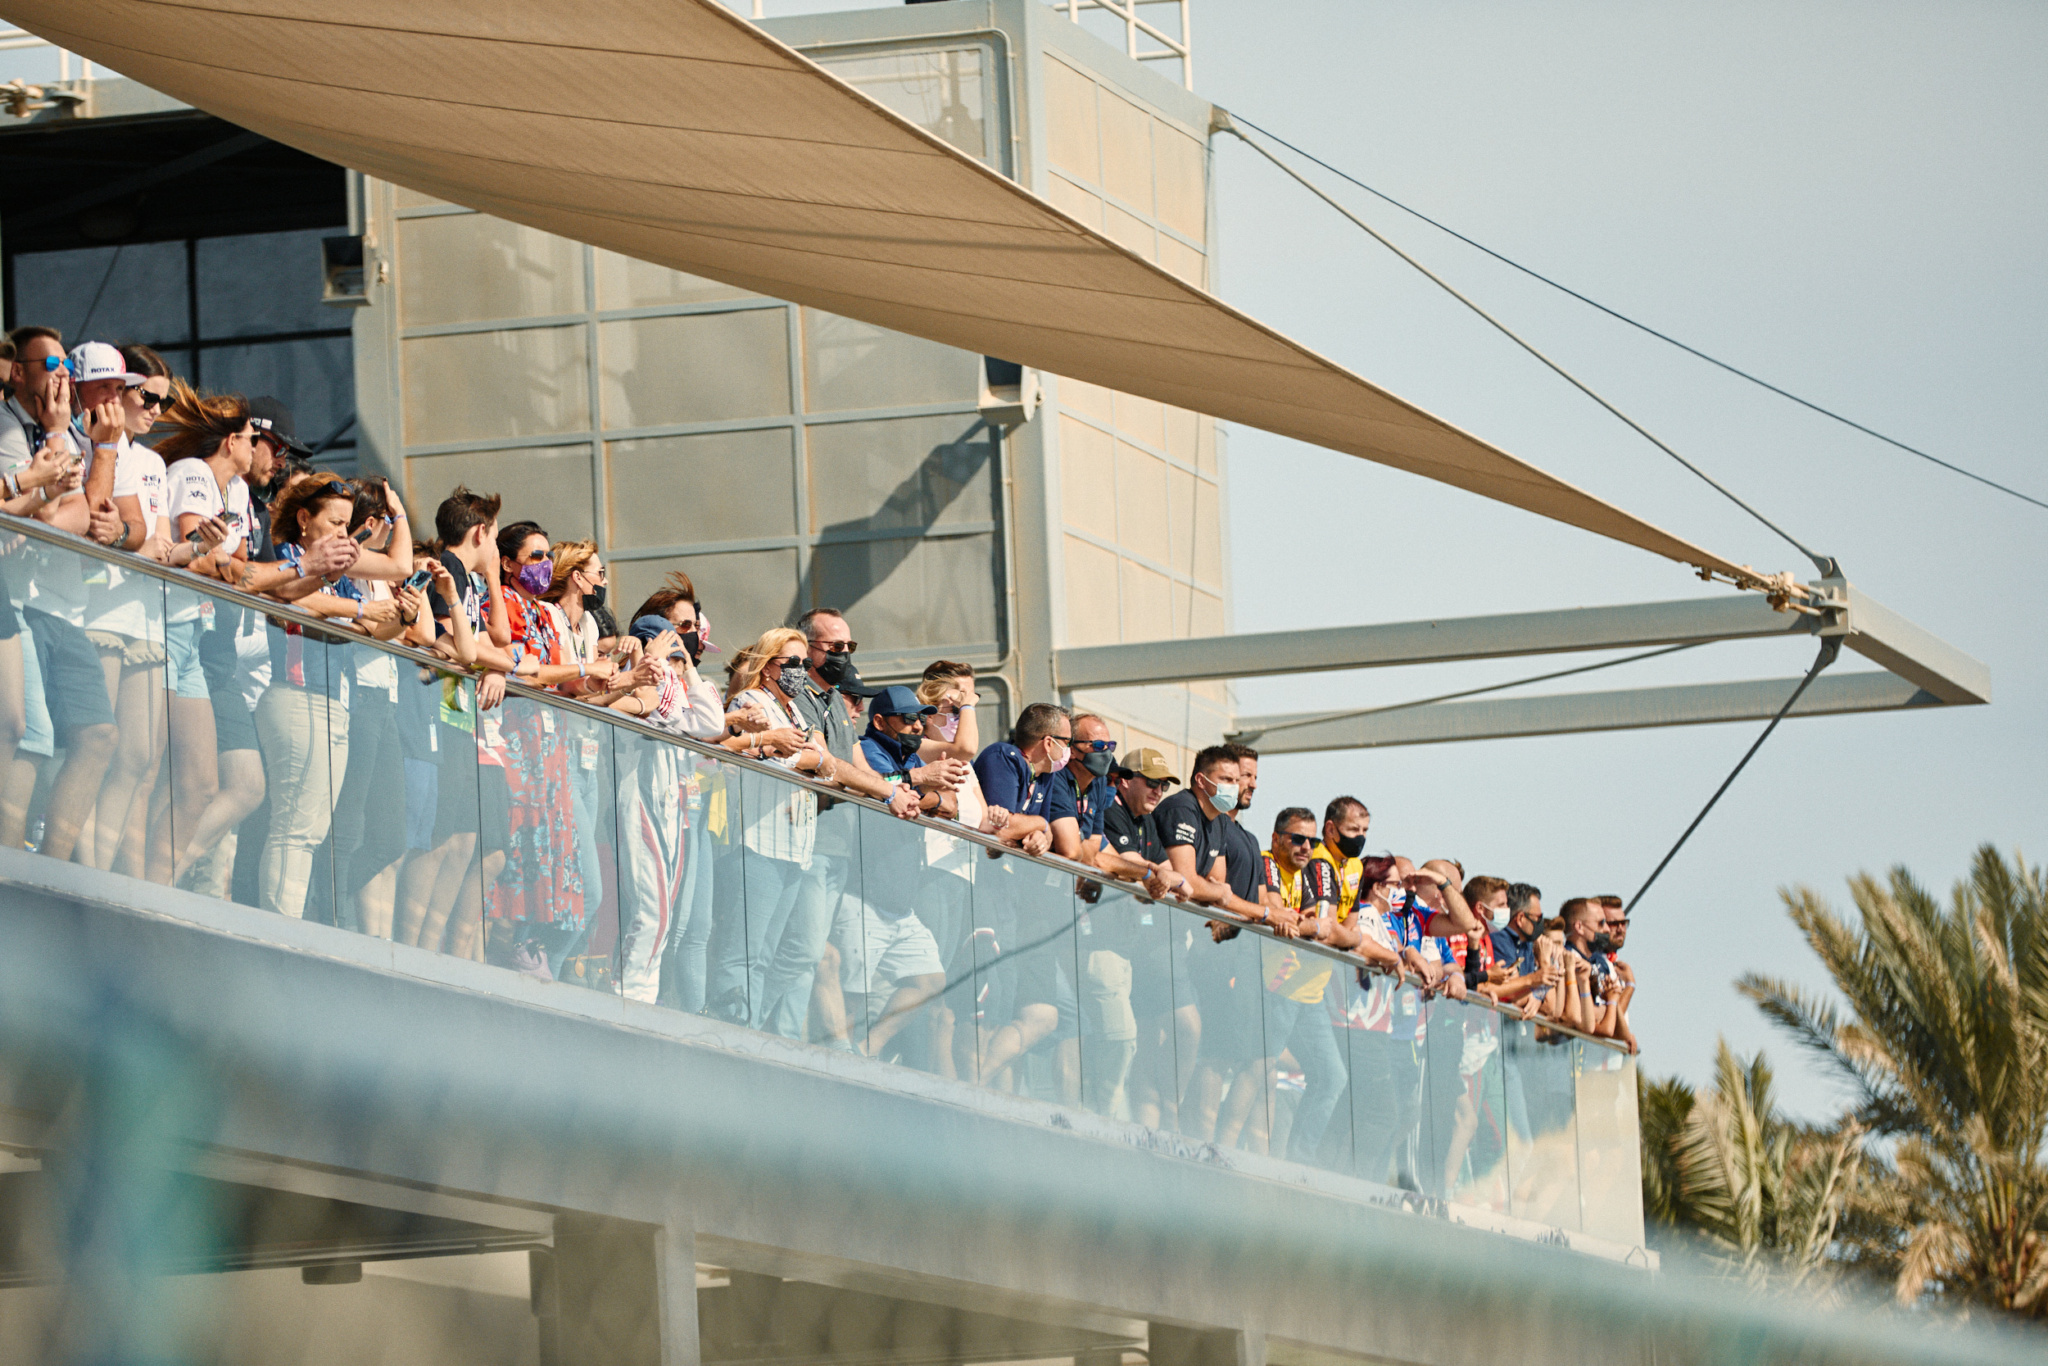 Rotax Racing Spectators at the terrace of the Rotax Club in Bahrain